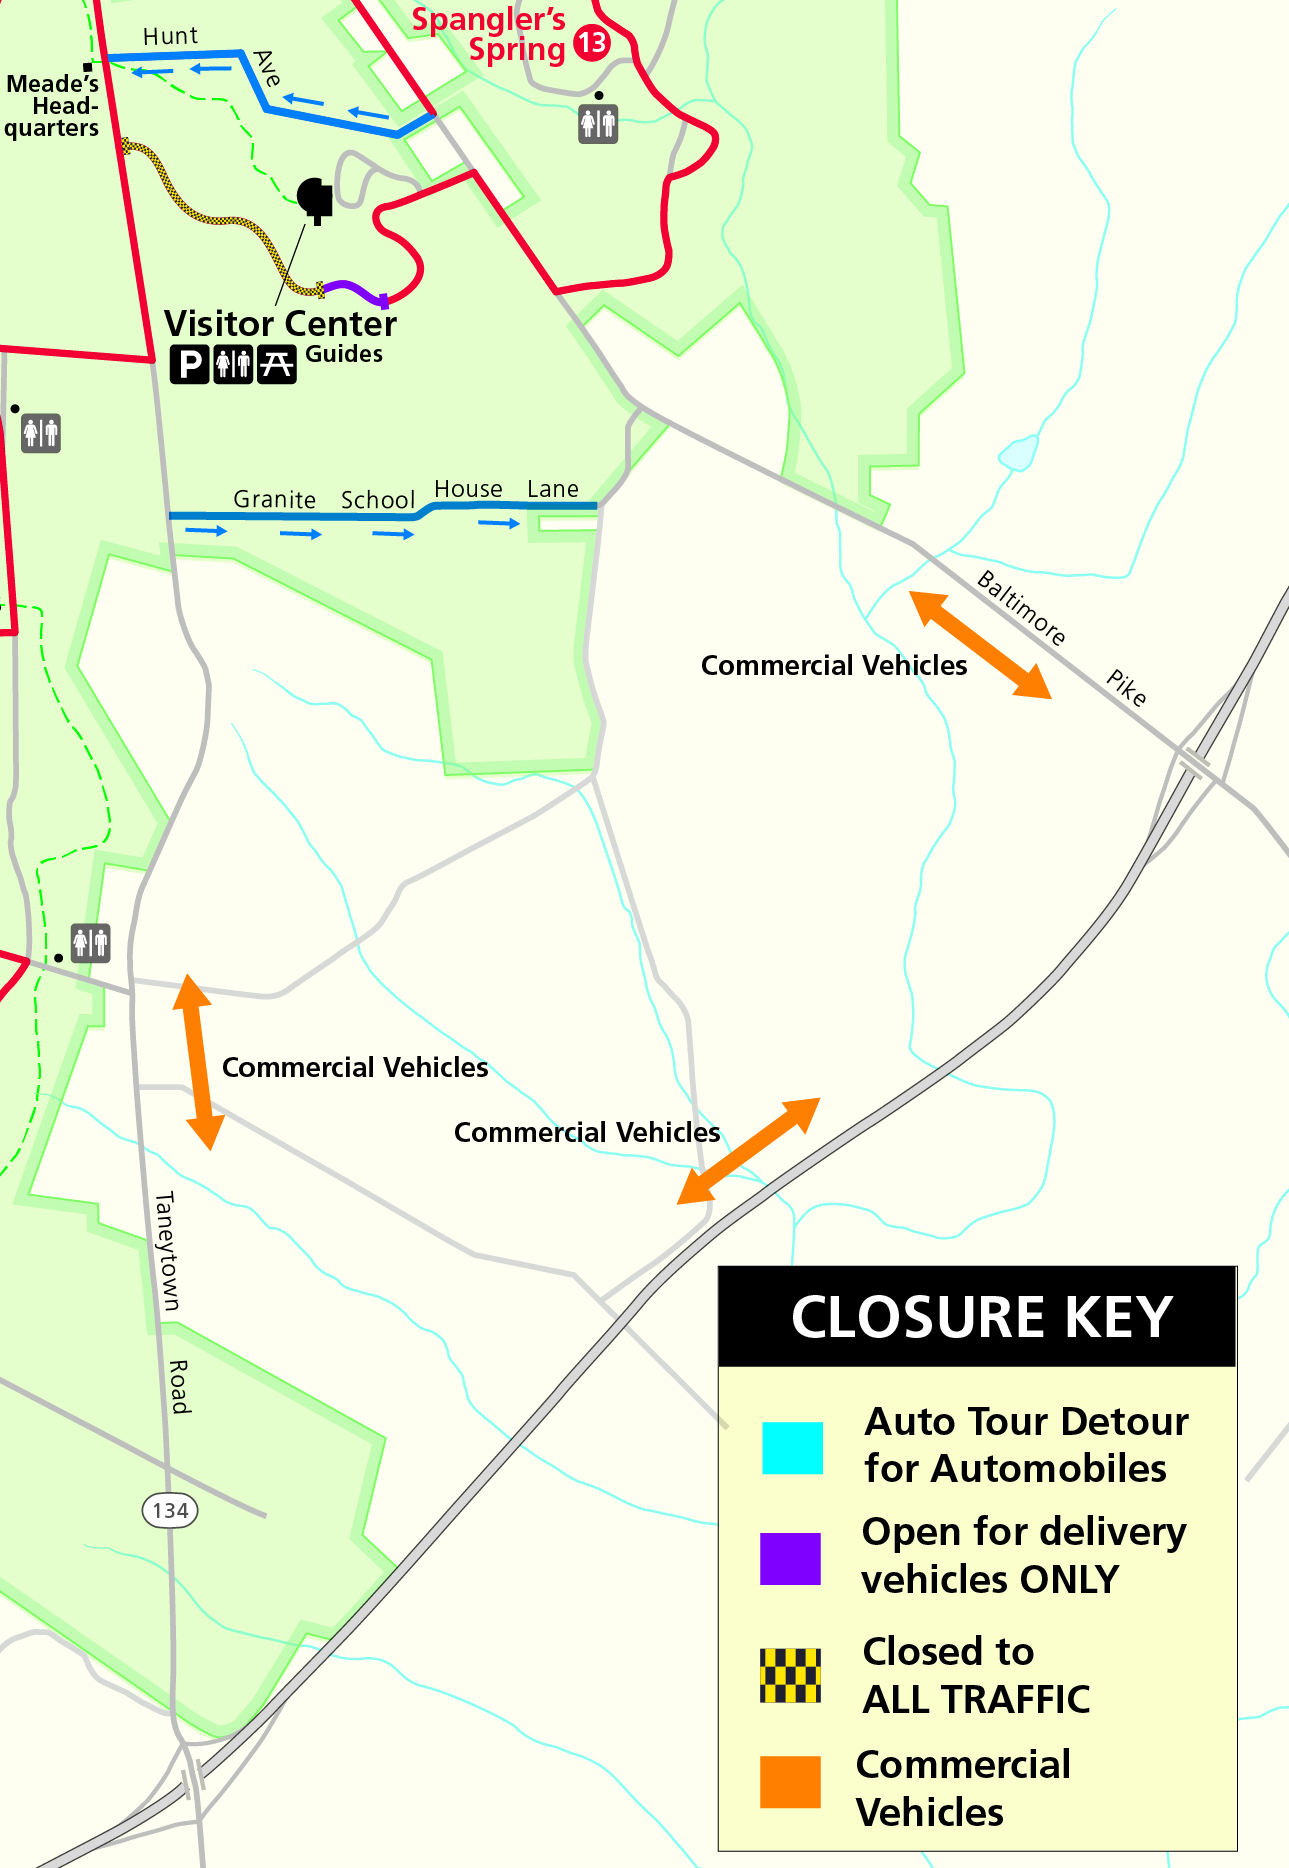 A color map depicting closed roads and detour routes around the closed road areas.